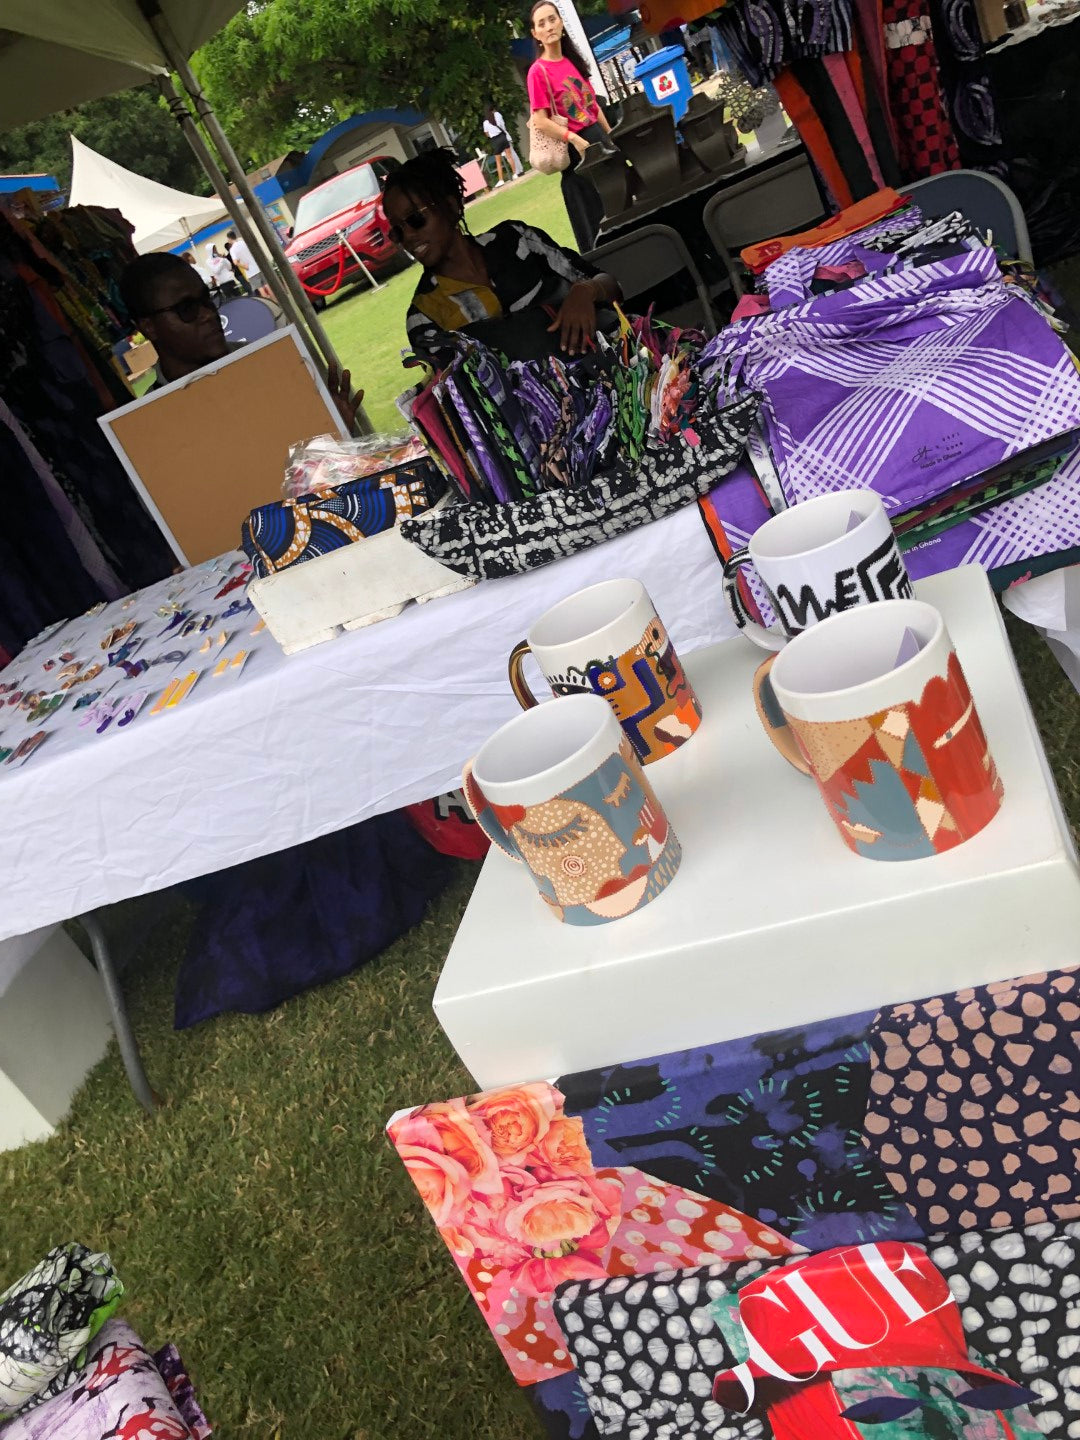 Colorful African print fabrics and designer mugs on display at an outdoor fair.